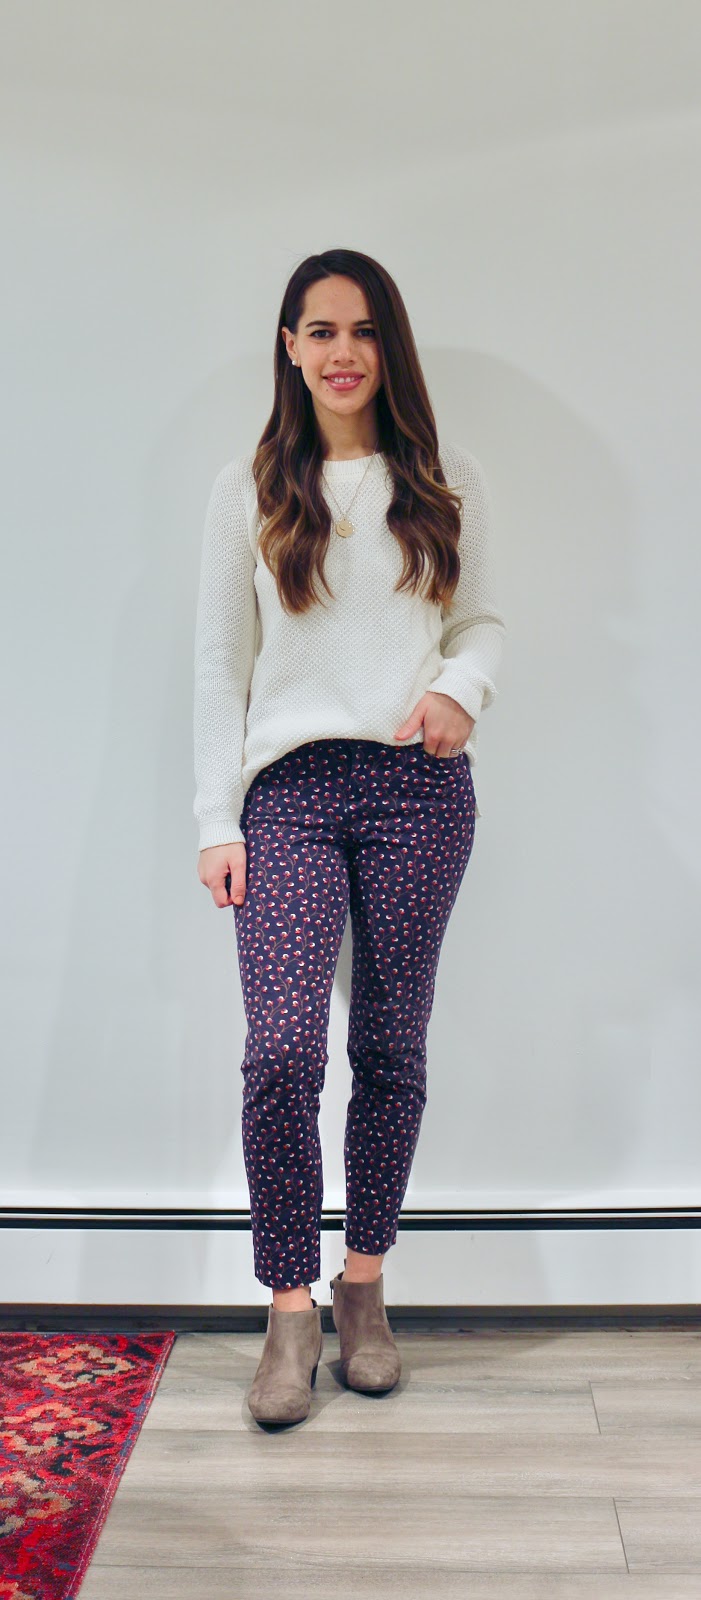 Jules in Flats - Patterned Pixie Ankle Pants with Knit Sweater and Ankle Boots (Business Casual Winter Workwear on a Budget)